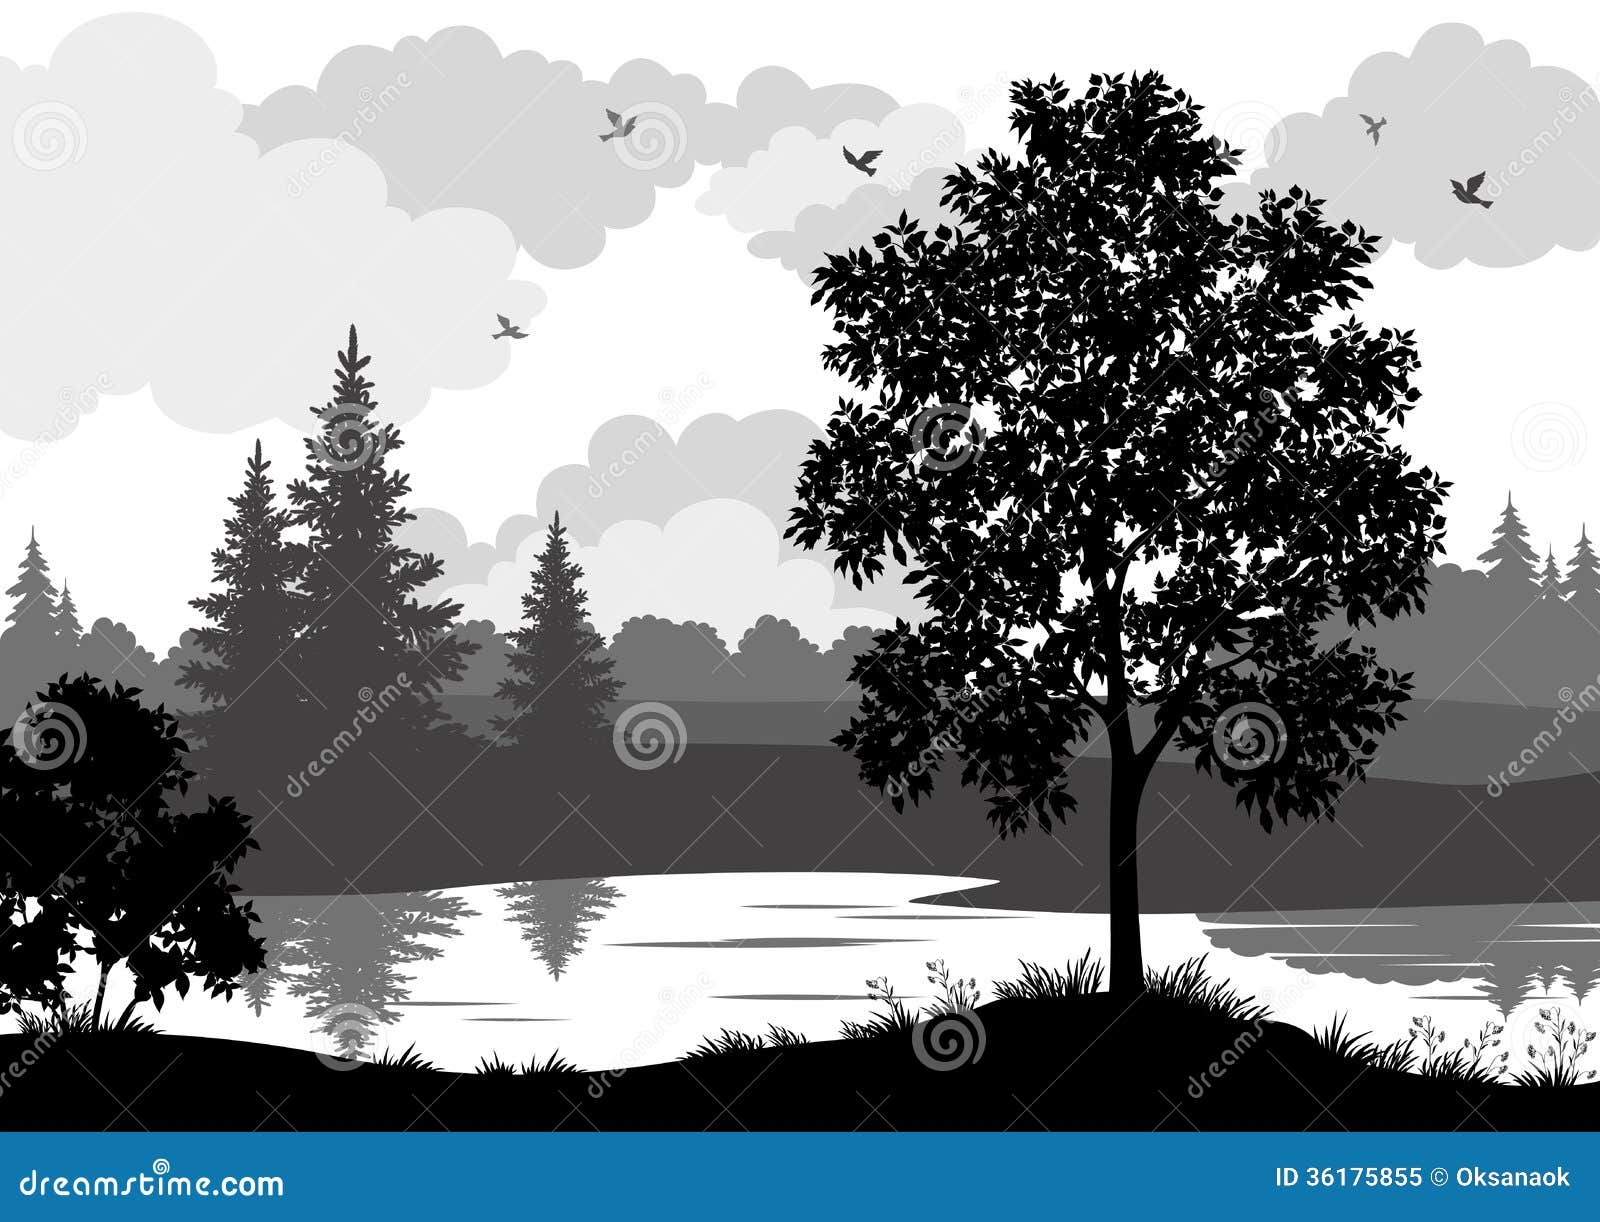 free black and white nature clipart - photo #48